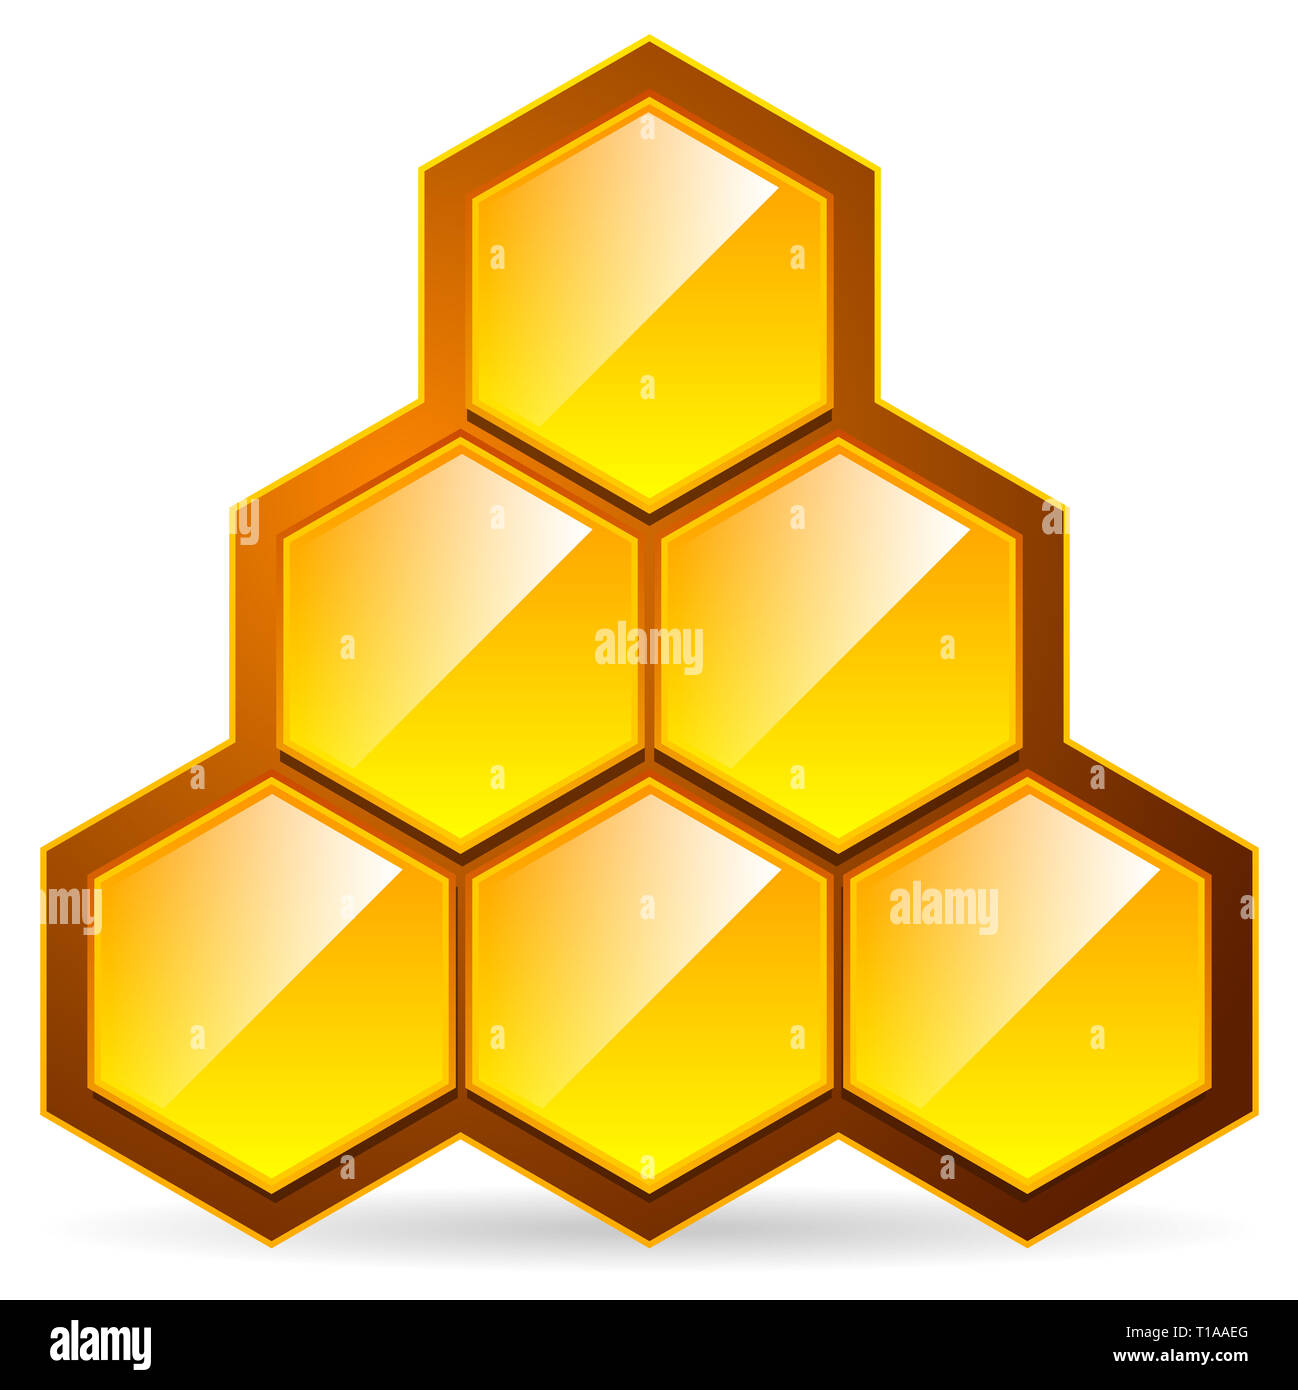 Eps 10 vector illustration of Honeycomb, honey cell illustration / icon isolated. Organic sweetener, natural food, nutrition, healthy ingredients, bee Stock Photo